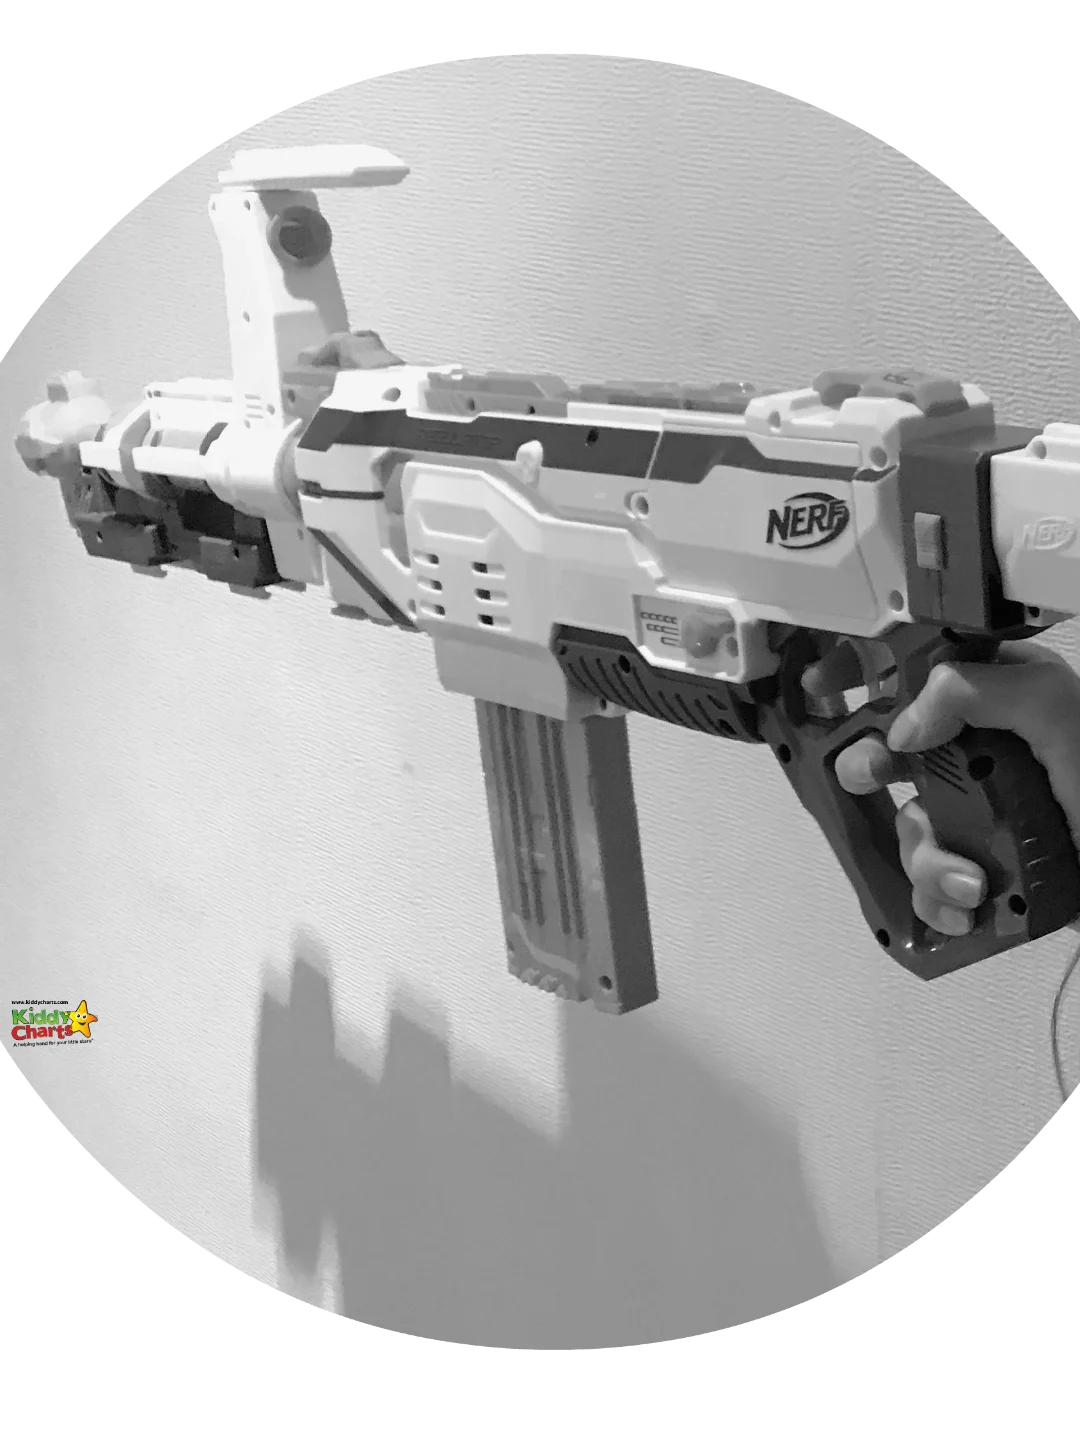 We loved having a play with our Nerf Gun even though we haven't really had too much to do with them previously - this was a great way to really get stuck into target practise with.